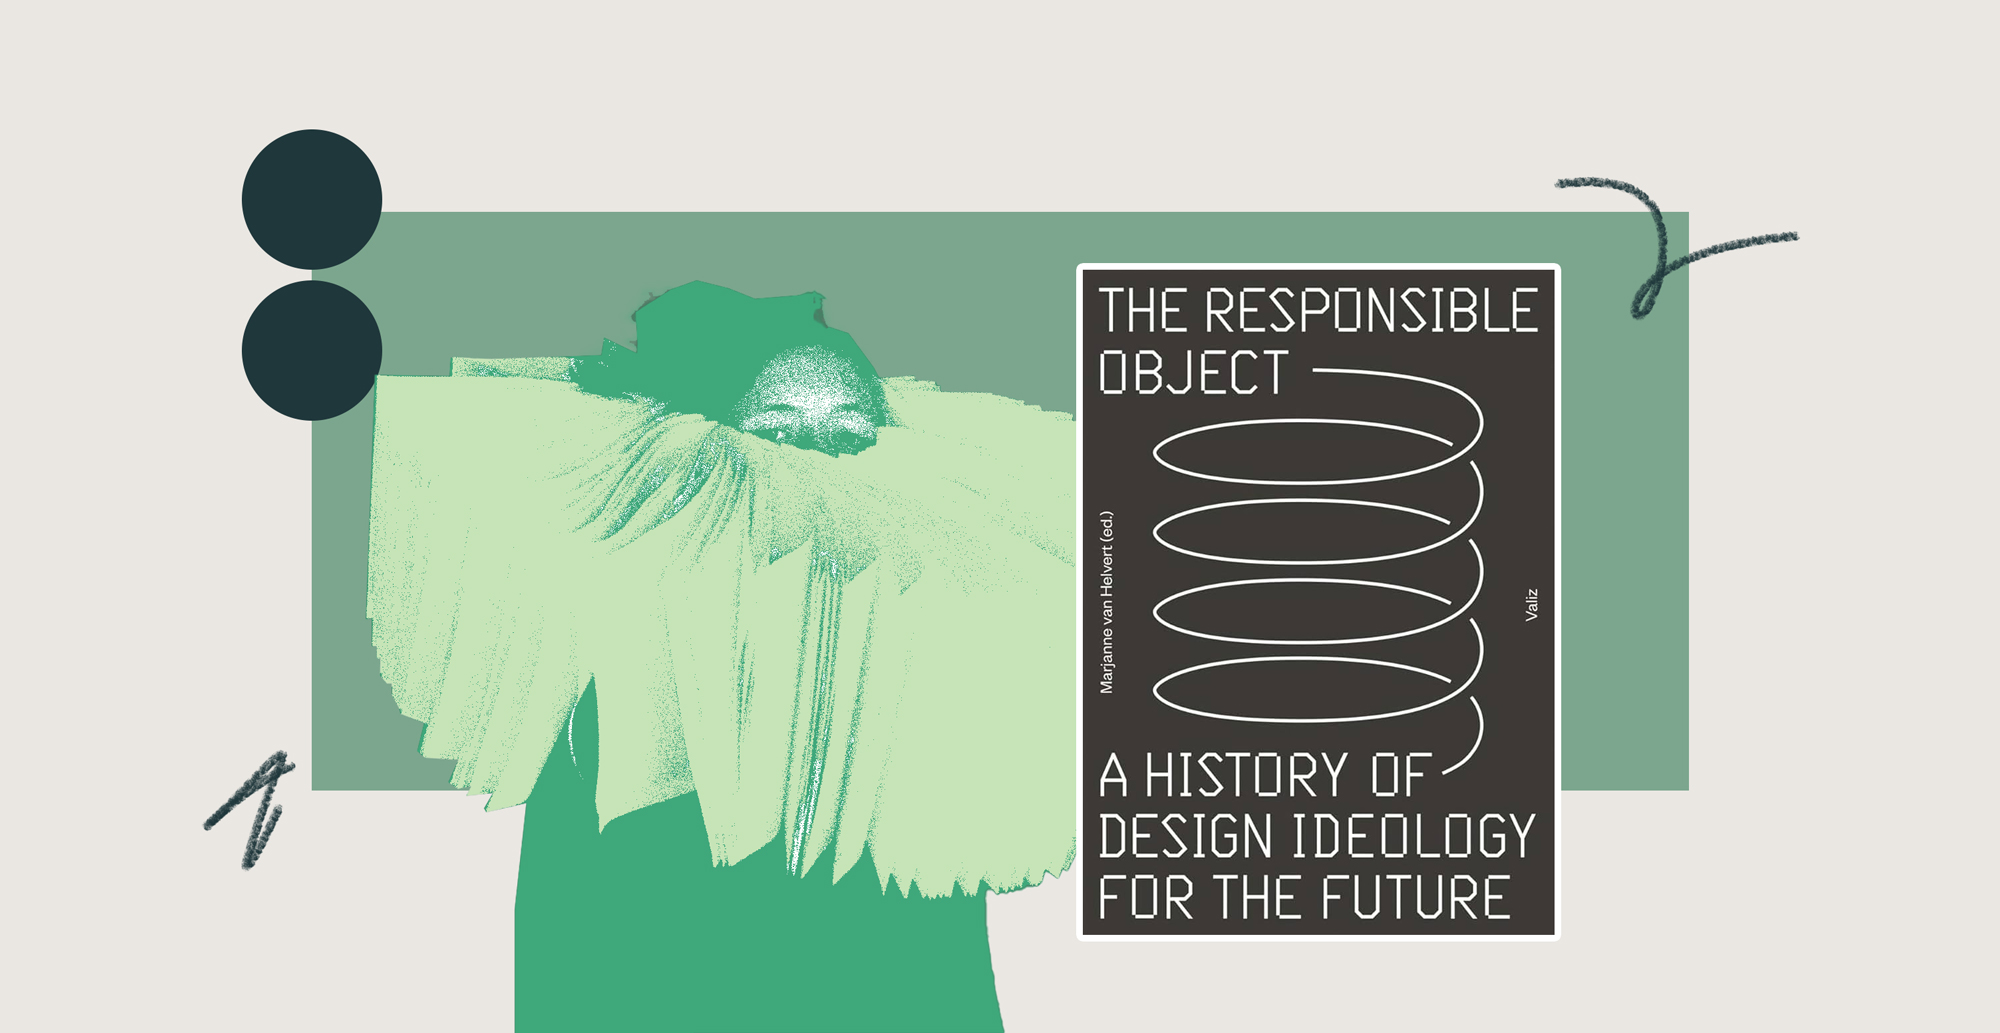 Marjanne van Helvert's "The Responsible Object: A History of Design Ideology for the Future" 